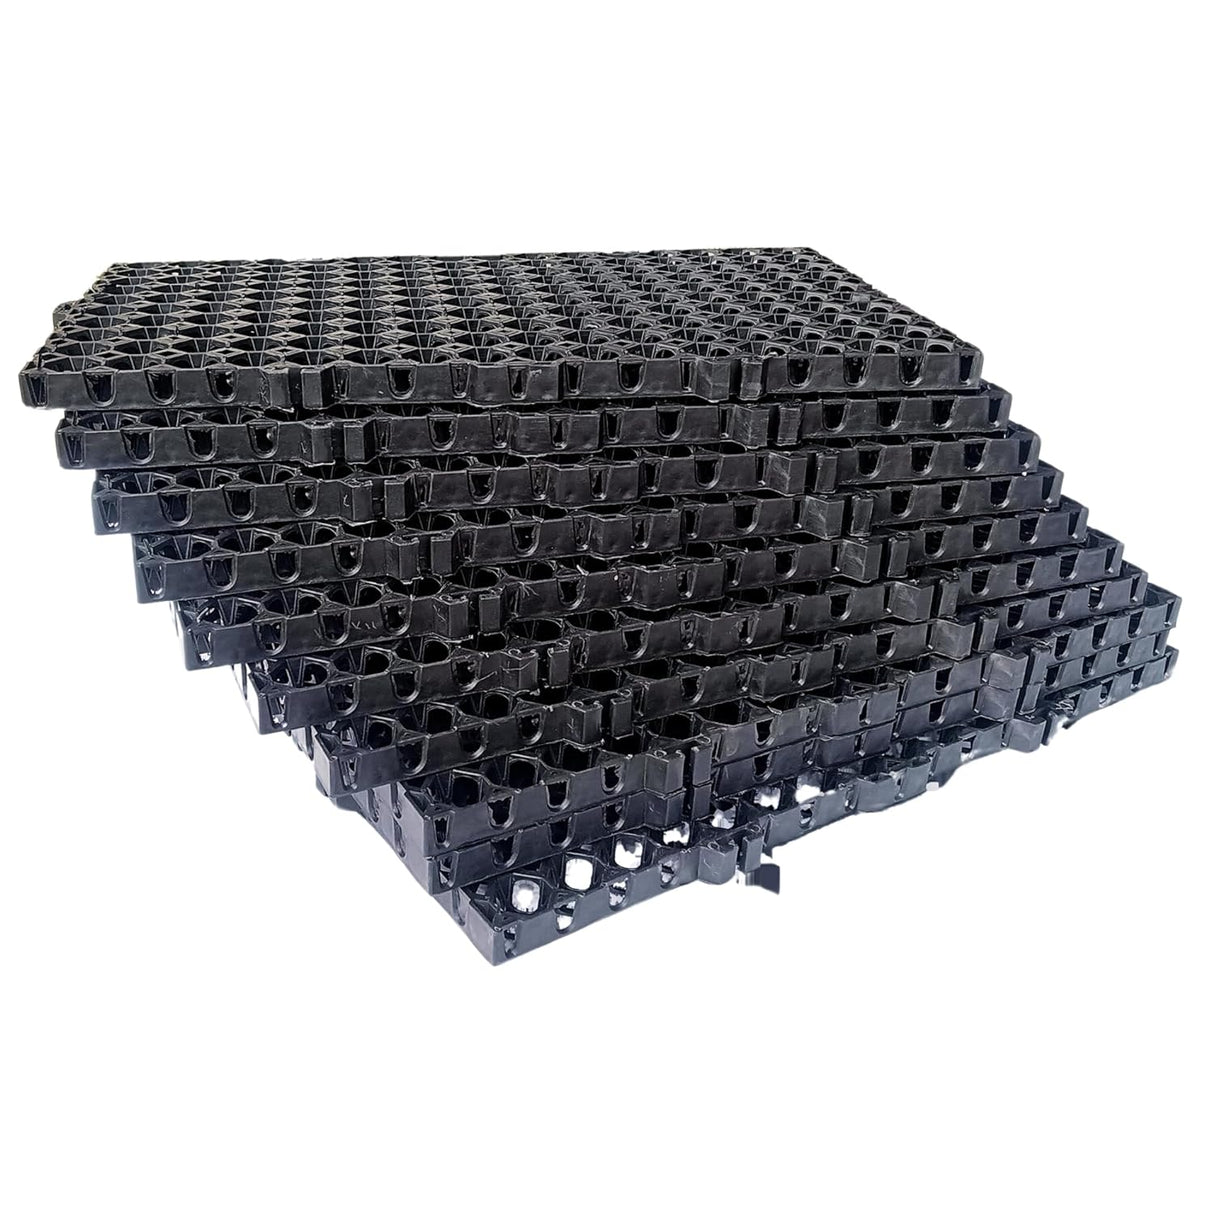 Singhal Garden Drain Cell Polypropylene Drain Cell and 20mm Drainage Mat for Terrace/Kitchen Garden (Black, 500 x 250 x 20) Pack of 4